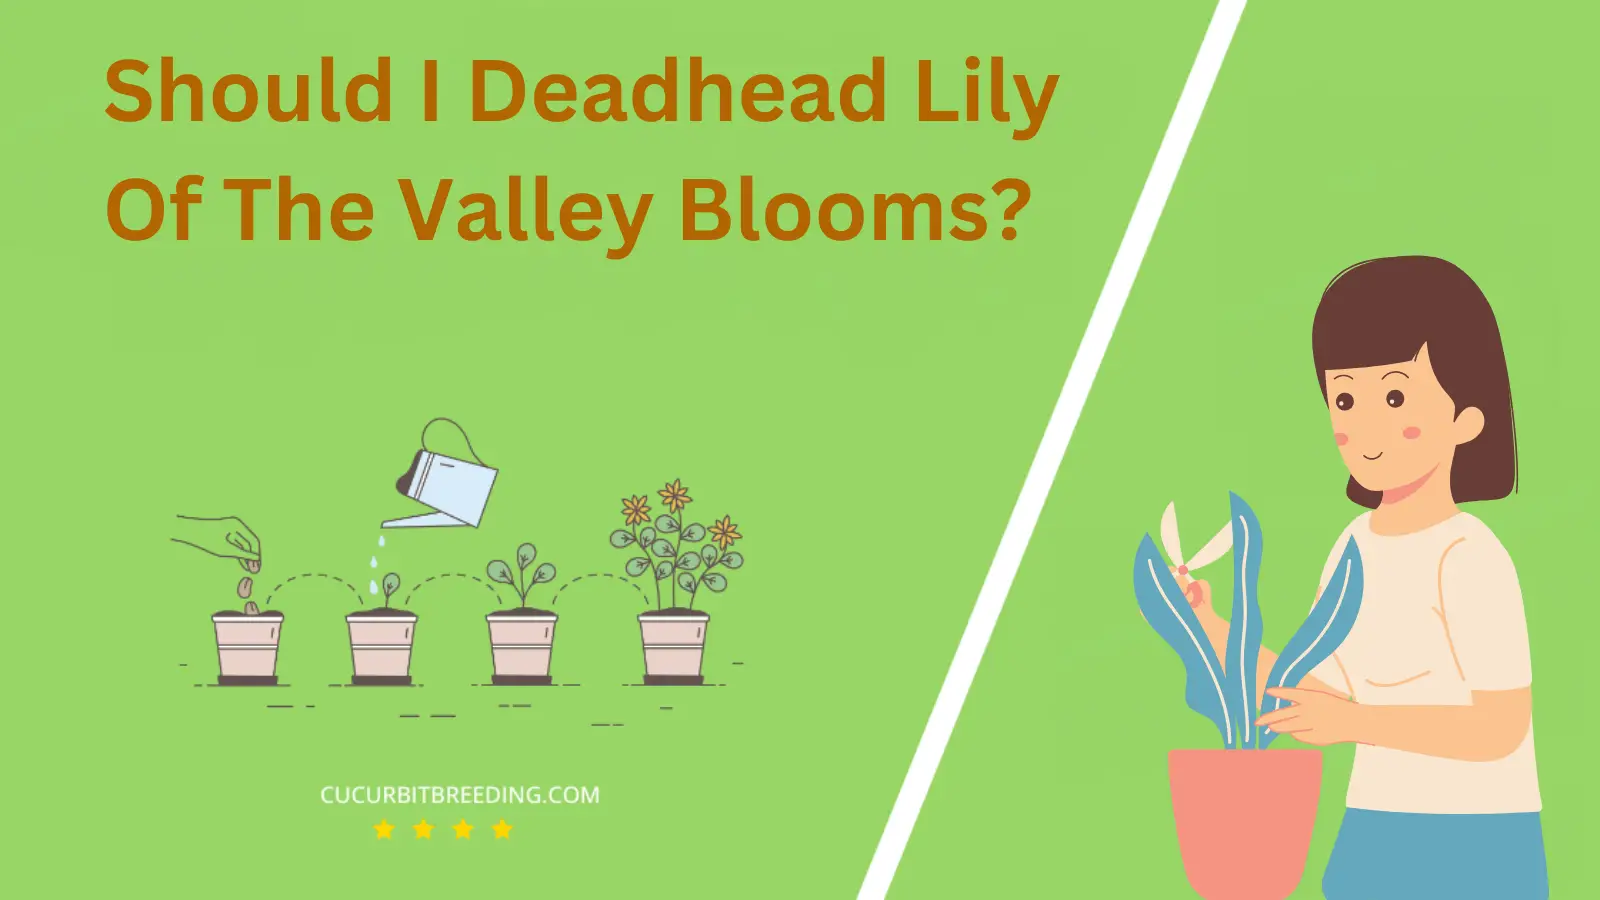 Should I Deadhead Lily Of The Valley Blooms?